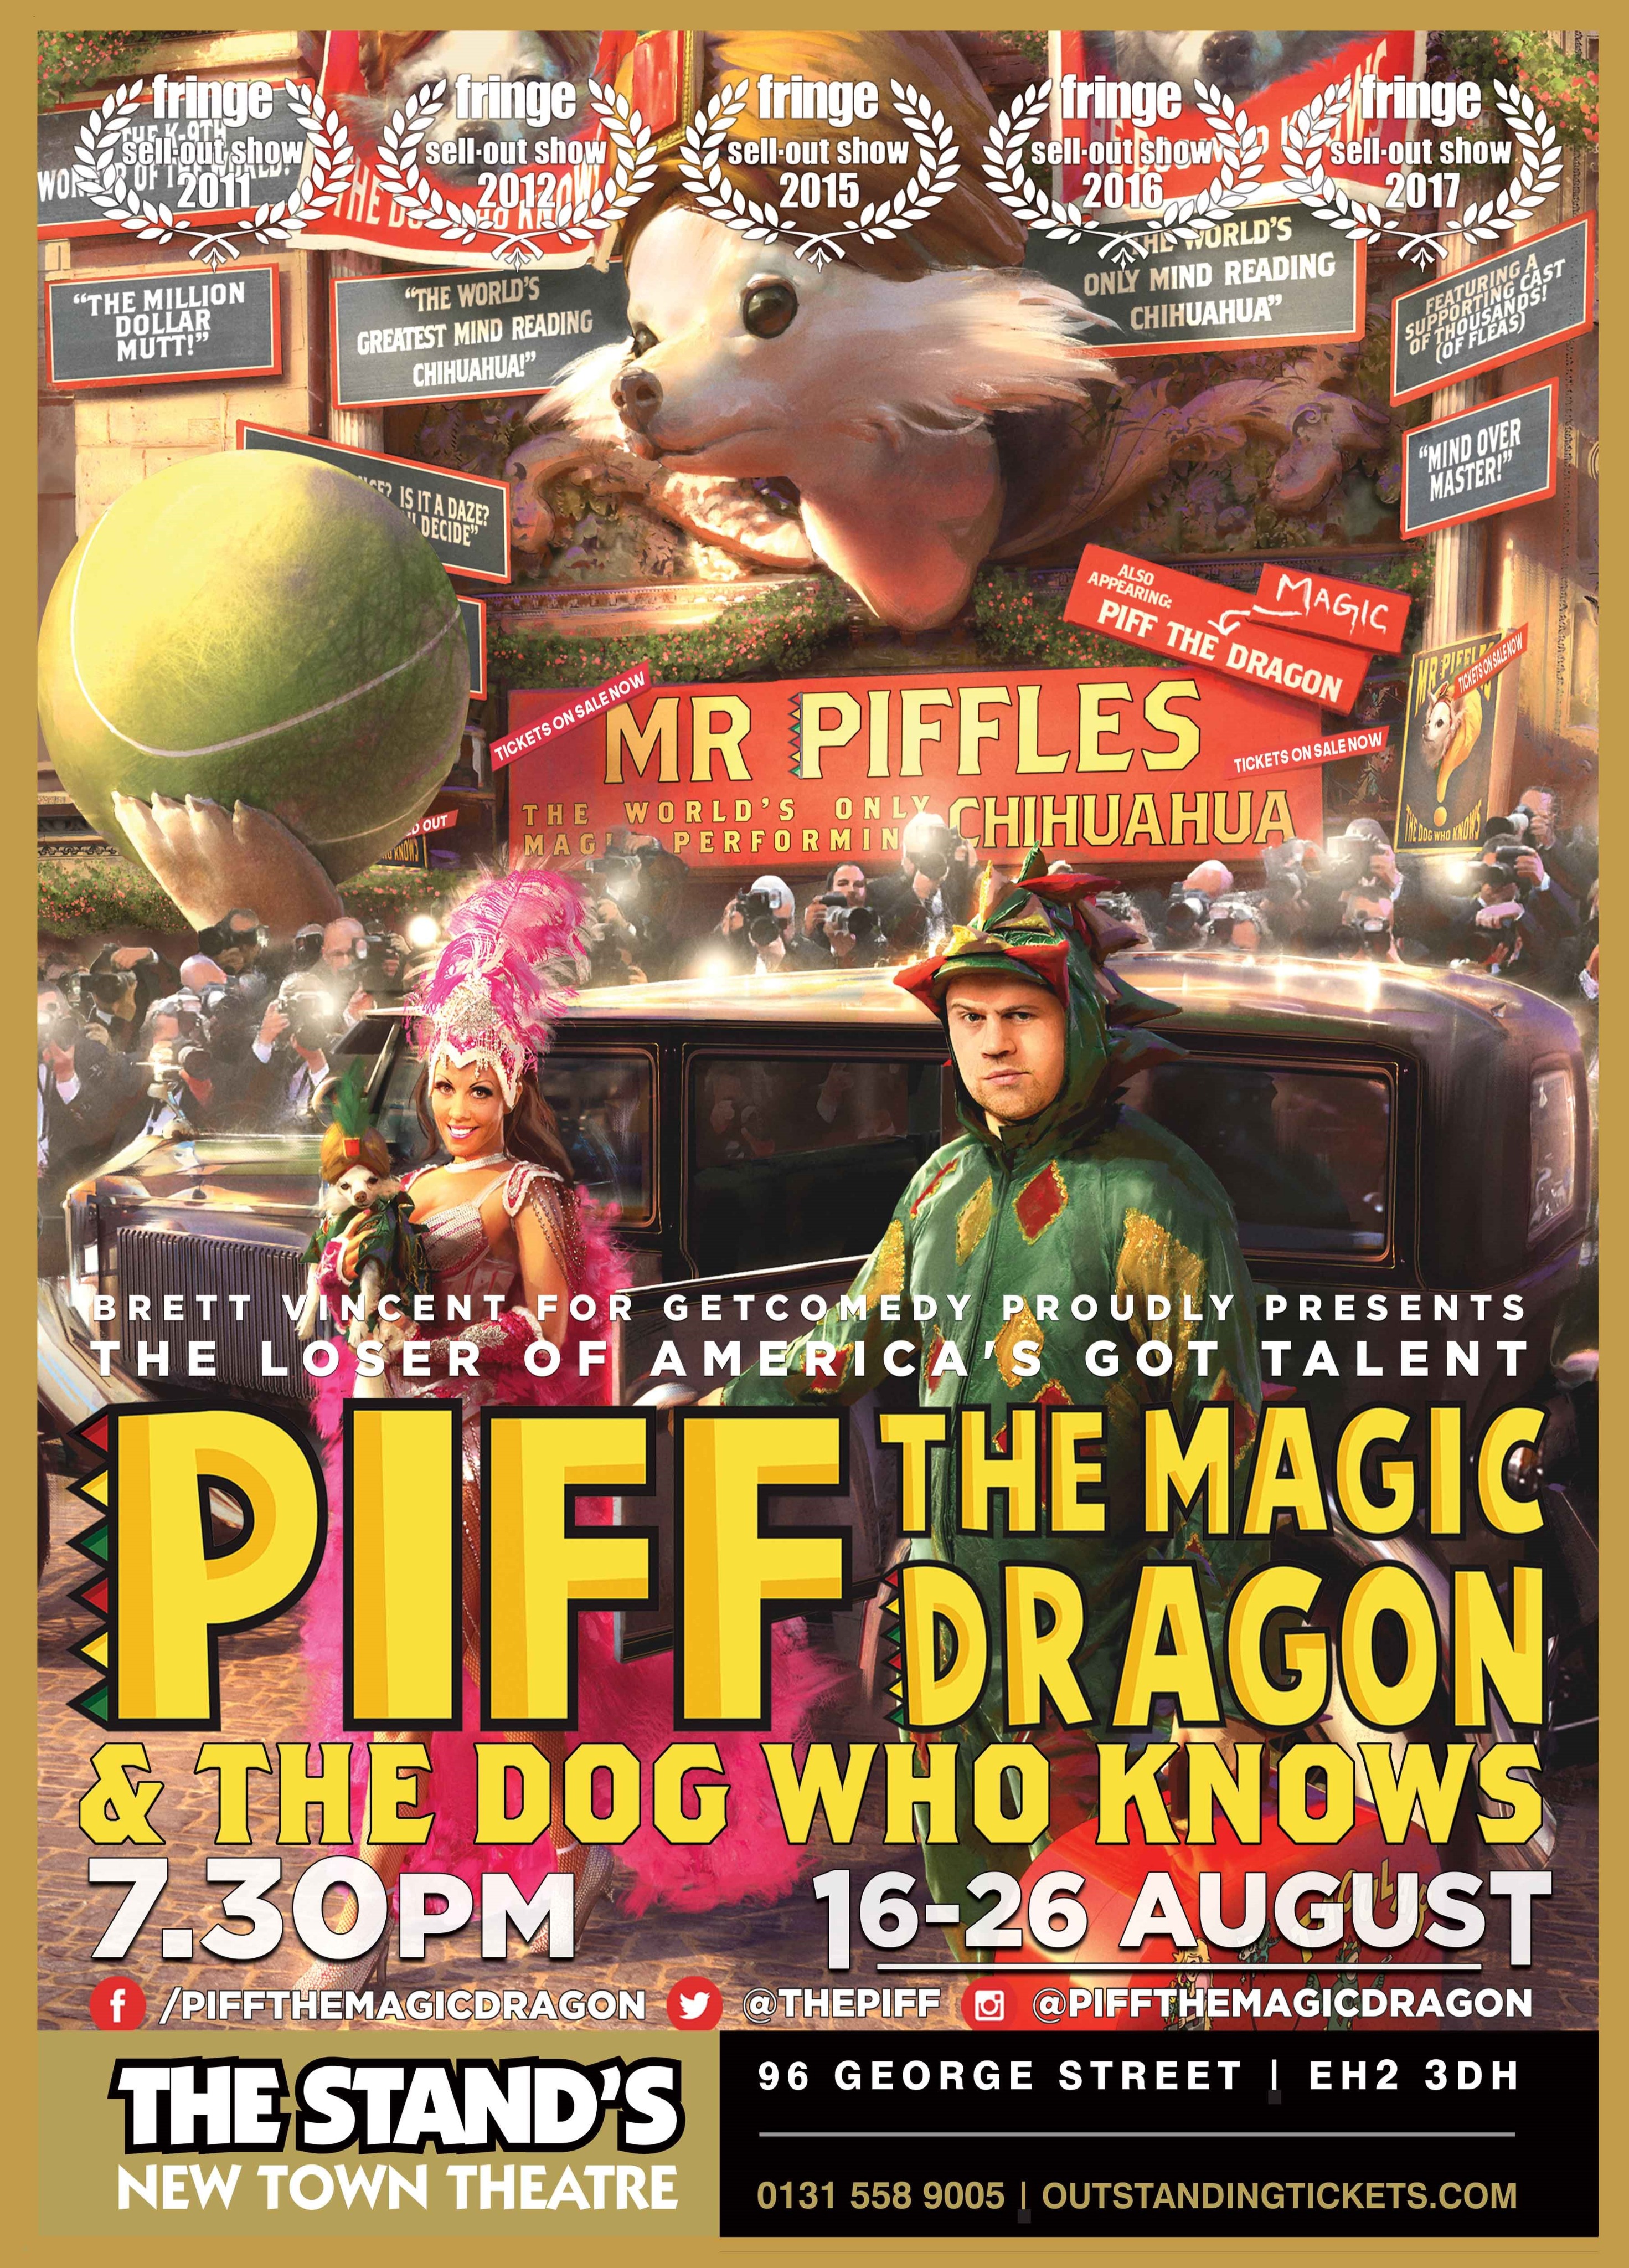 The poster for Piff the Magic Dragon and the Dog Who Knows